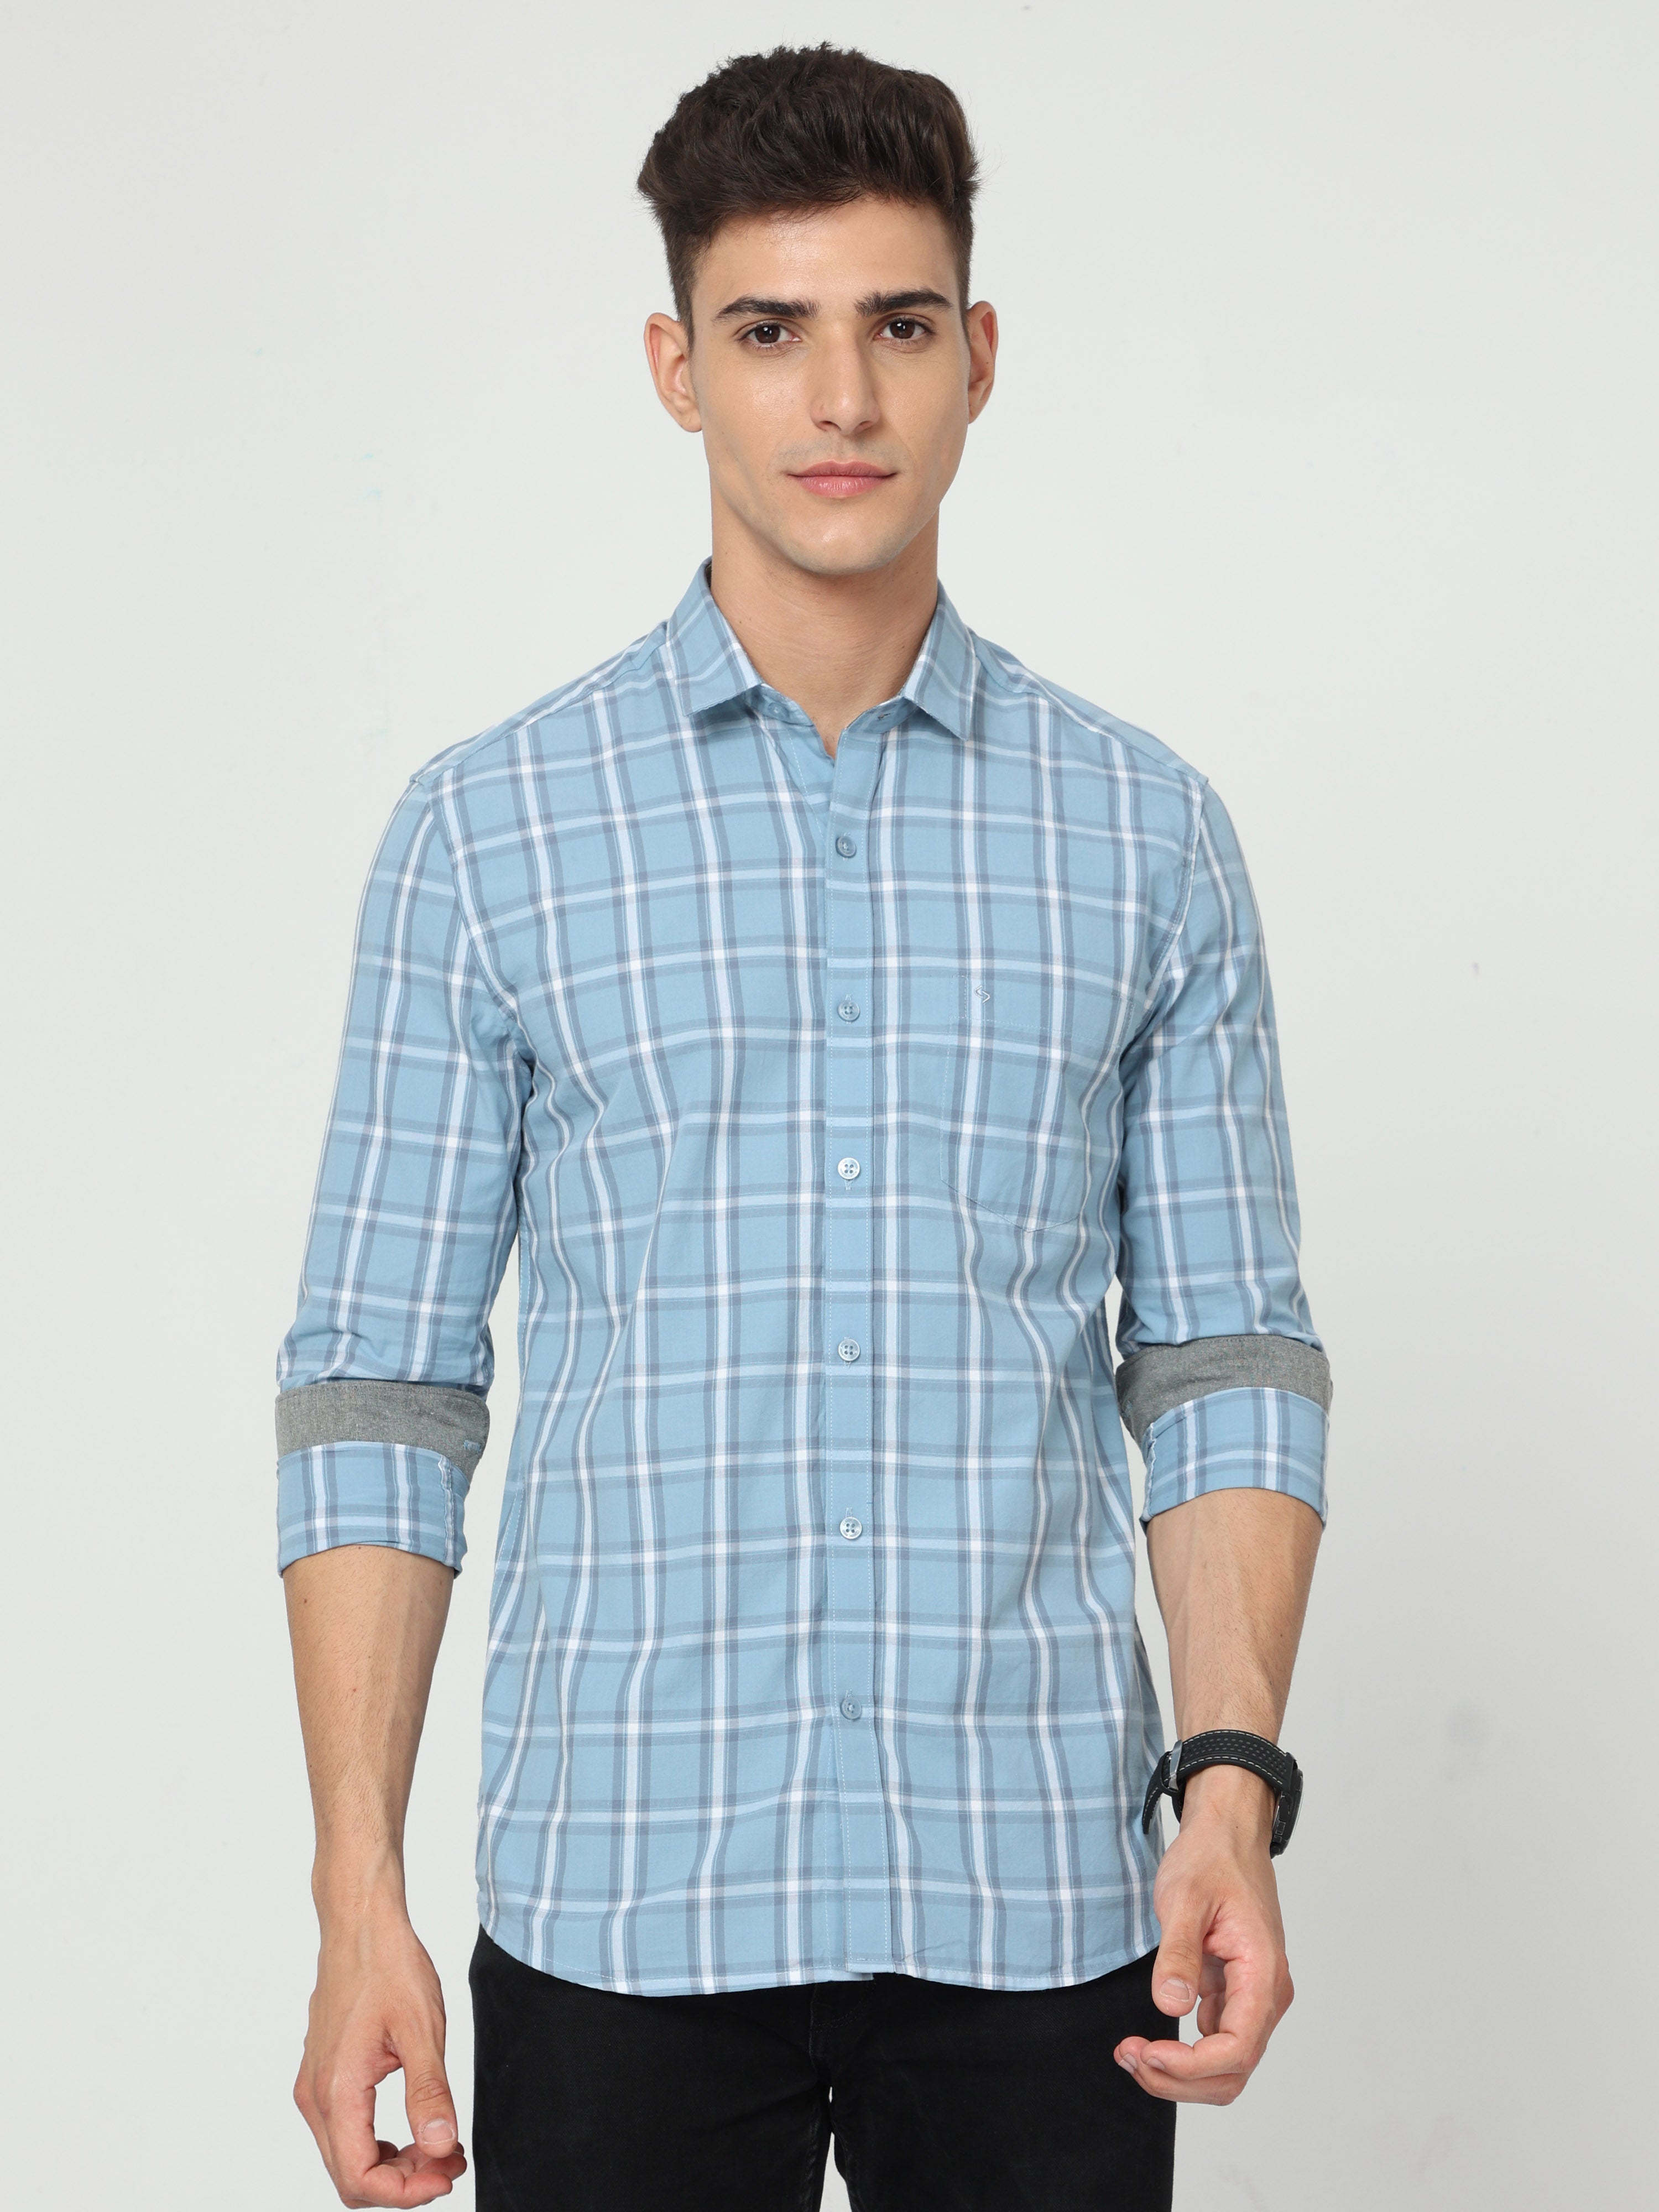 Classic Polo Men's Cotton Full Sleeve Checked Slim Fit Polo Neck Blue Color Woven Shirt | So1-106 A